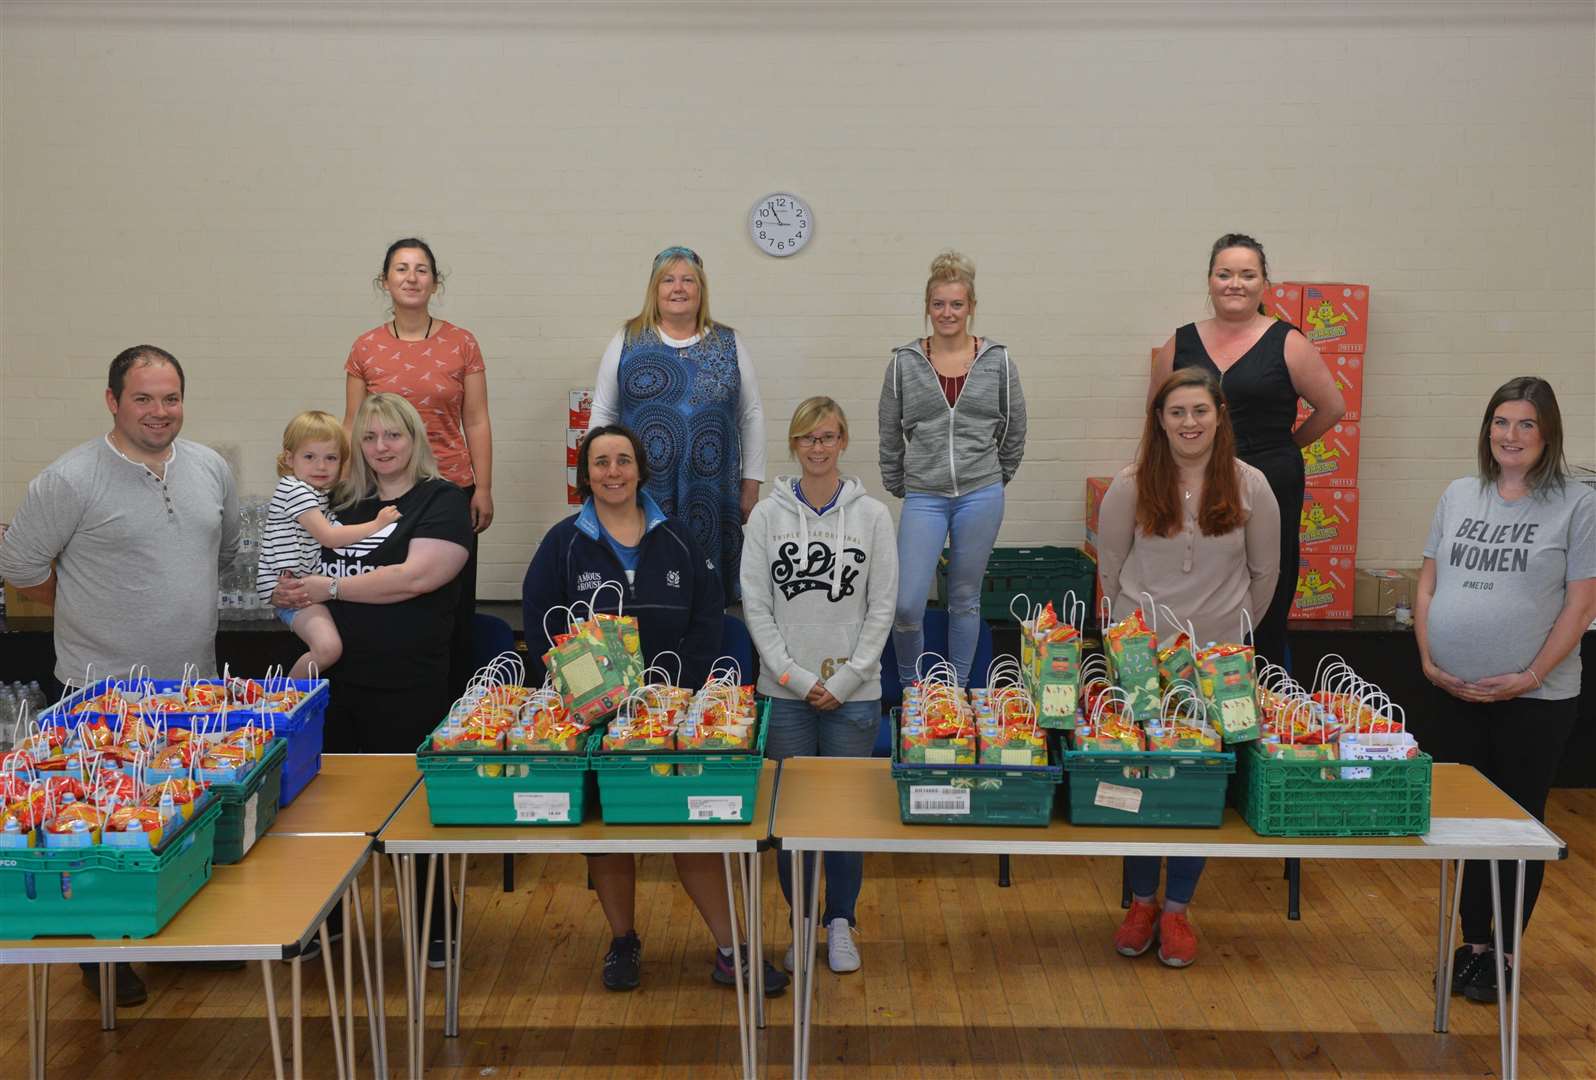 The volunteers who assembled lunch bags and delivered them twice weekly to 90 households for 10 weeks. Pictured are: Eilidh and Alan Macleod with daughter Leah, Konstantina Pateraki, Kim Jappy, Fiona Macfarlane, Nicola Jappy, Lara Ryan, Tiegan Johnstone, Karen Gilmour, and Joanna Mackenzie. Picture: Jim A Johnston